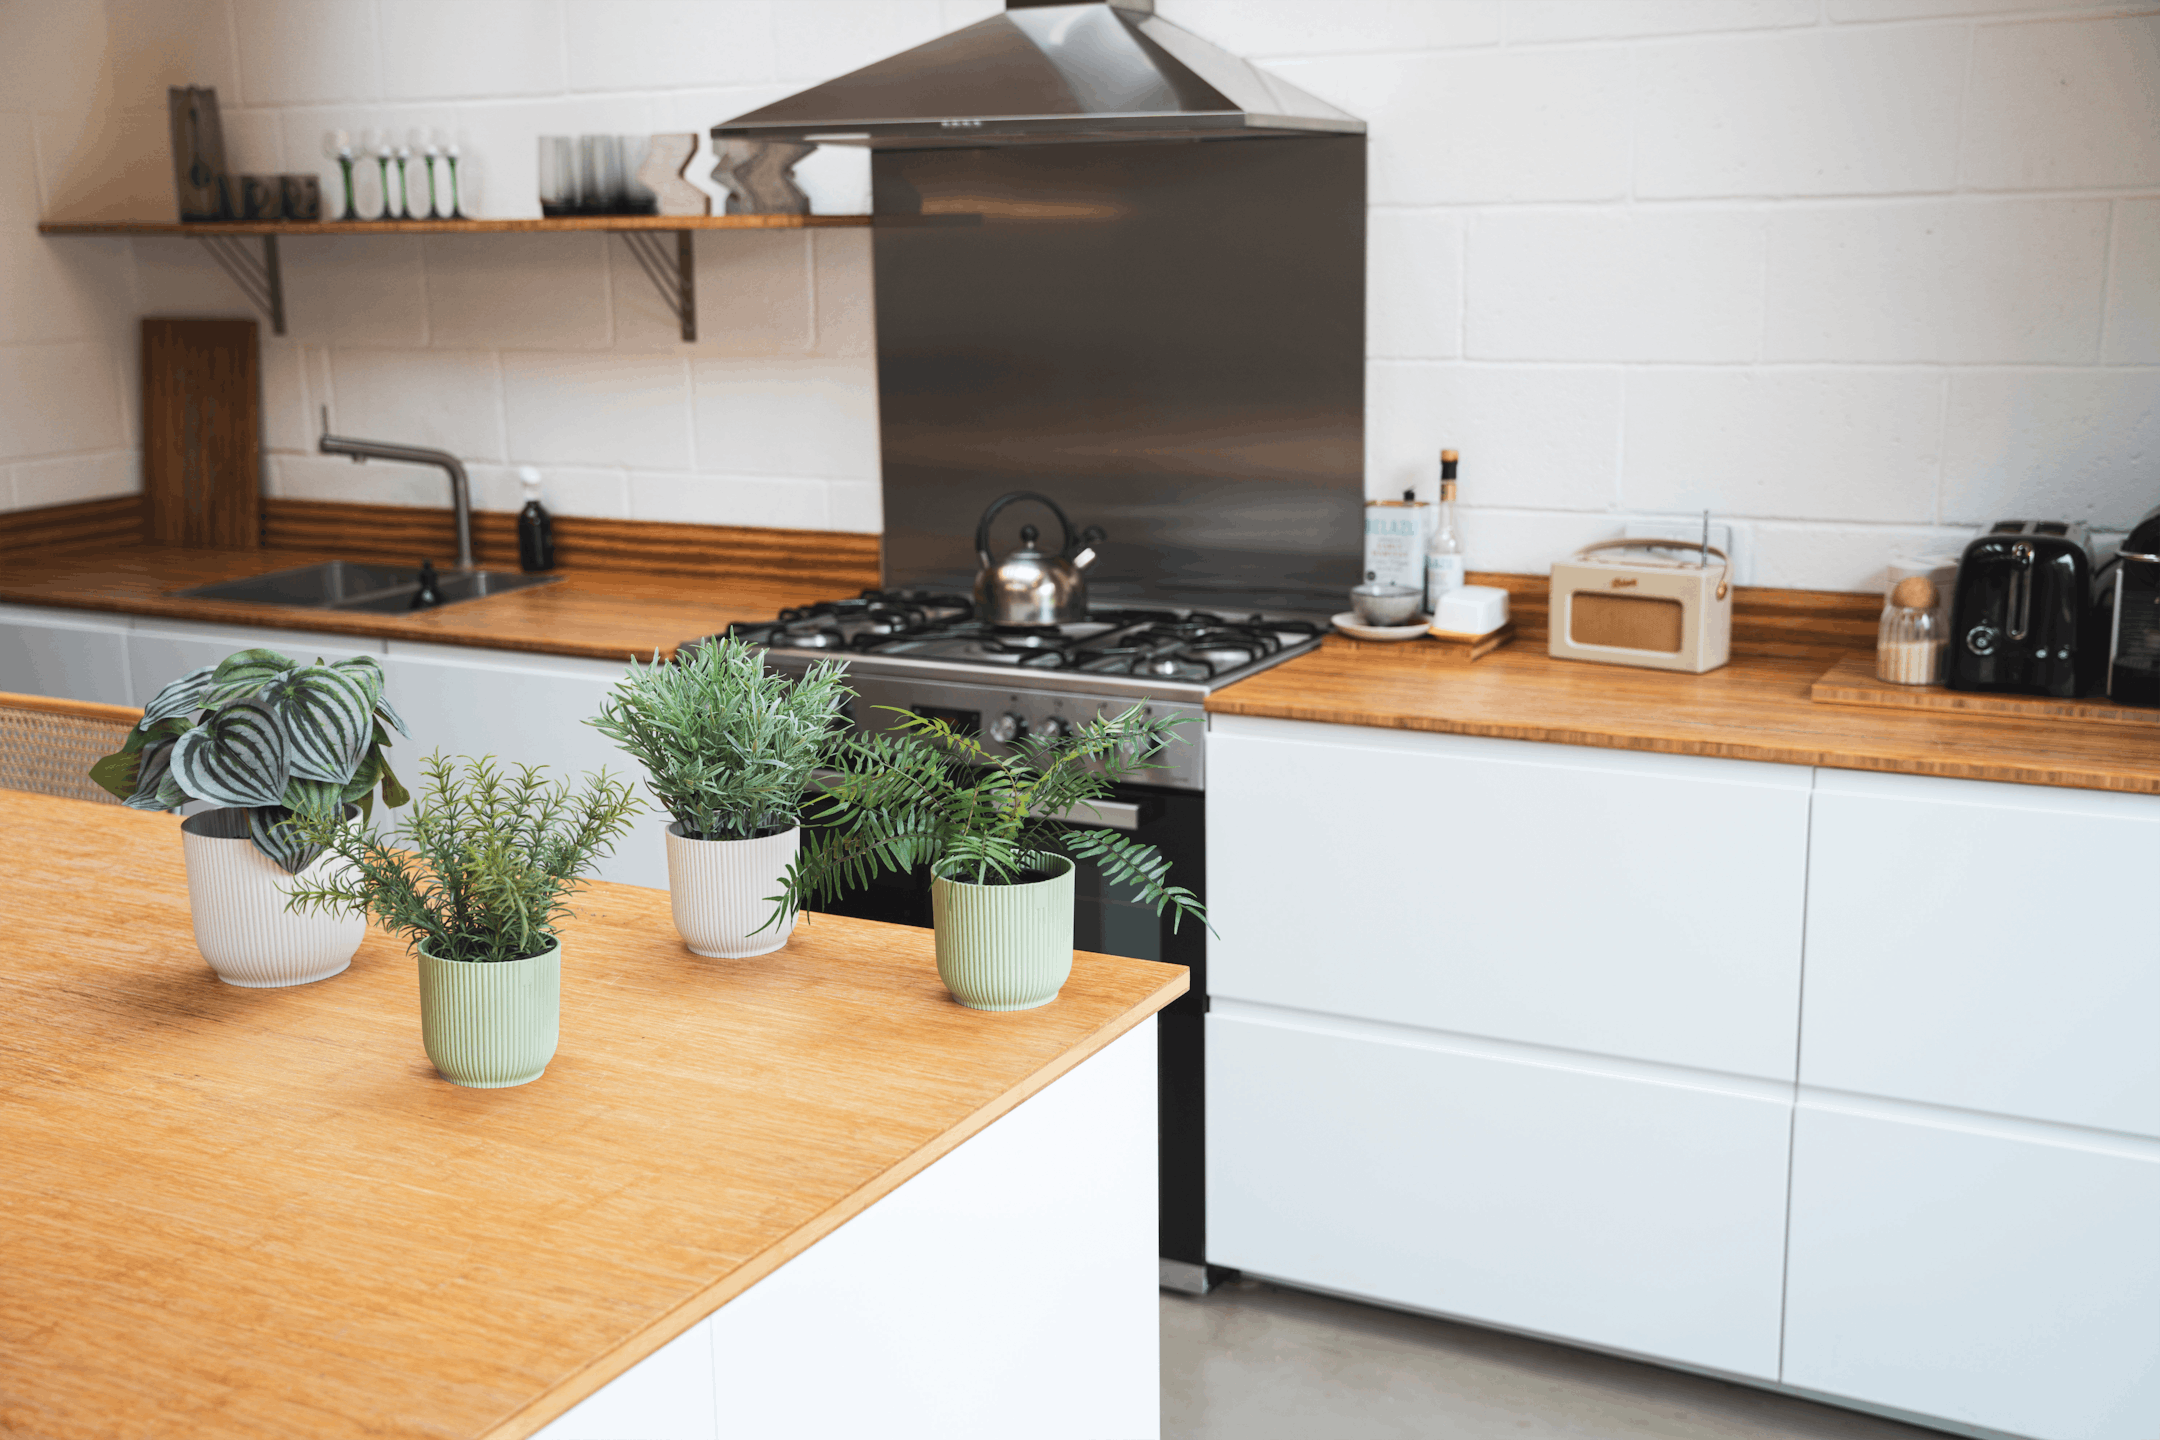 Artificial small plants in pots on wooden kitchen island